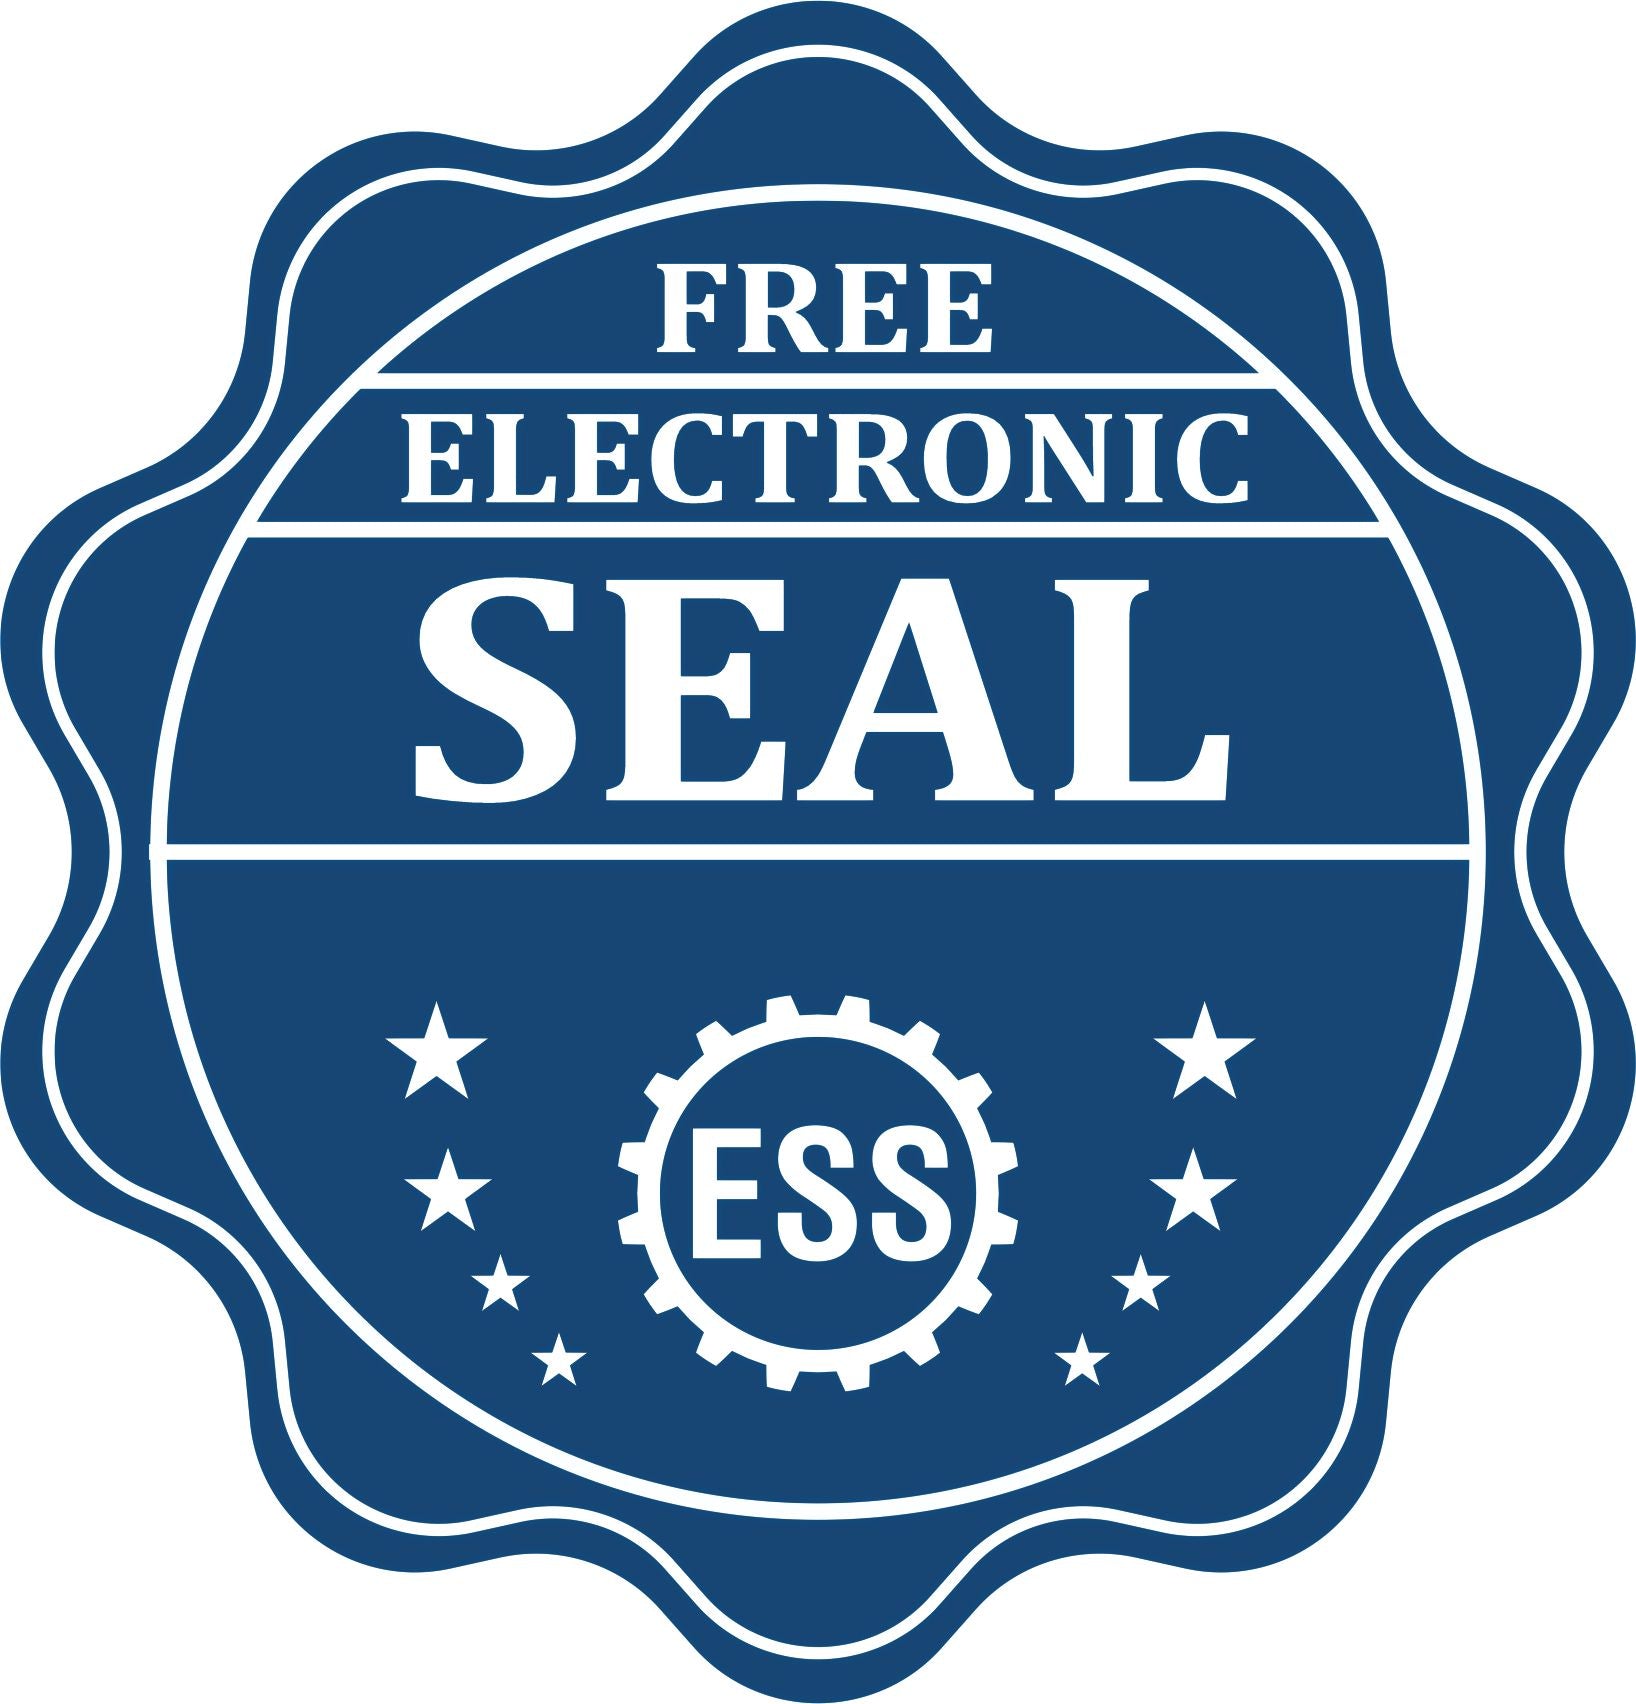 A badge showing a free electronic seal for the Tennessee Long Reach Landscape Architect Embossing Stamp with stars and the ESS gear on the emblem.